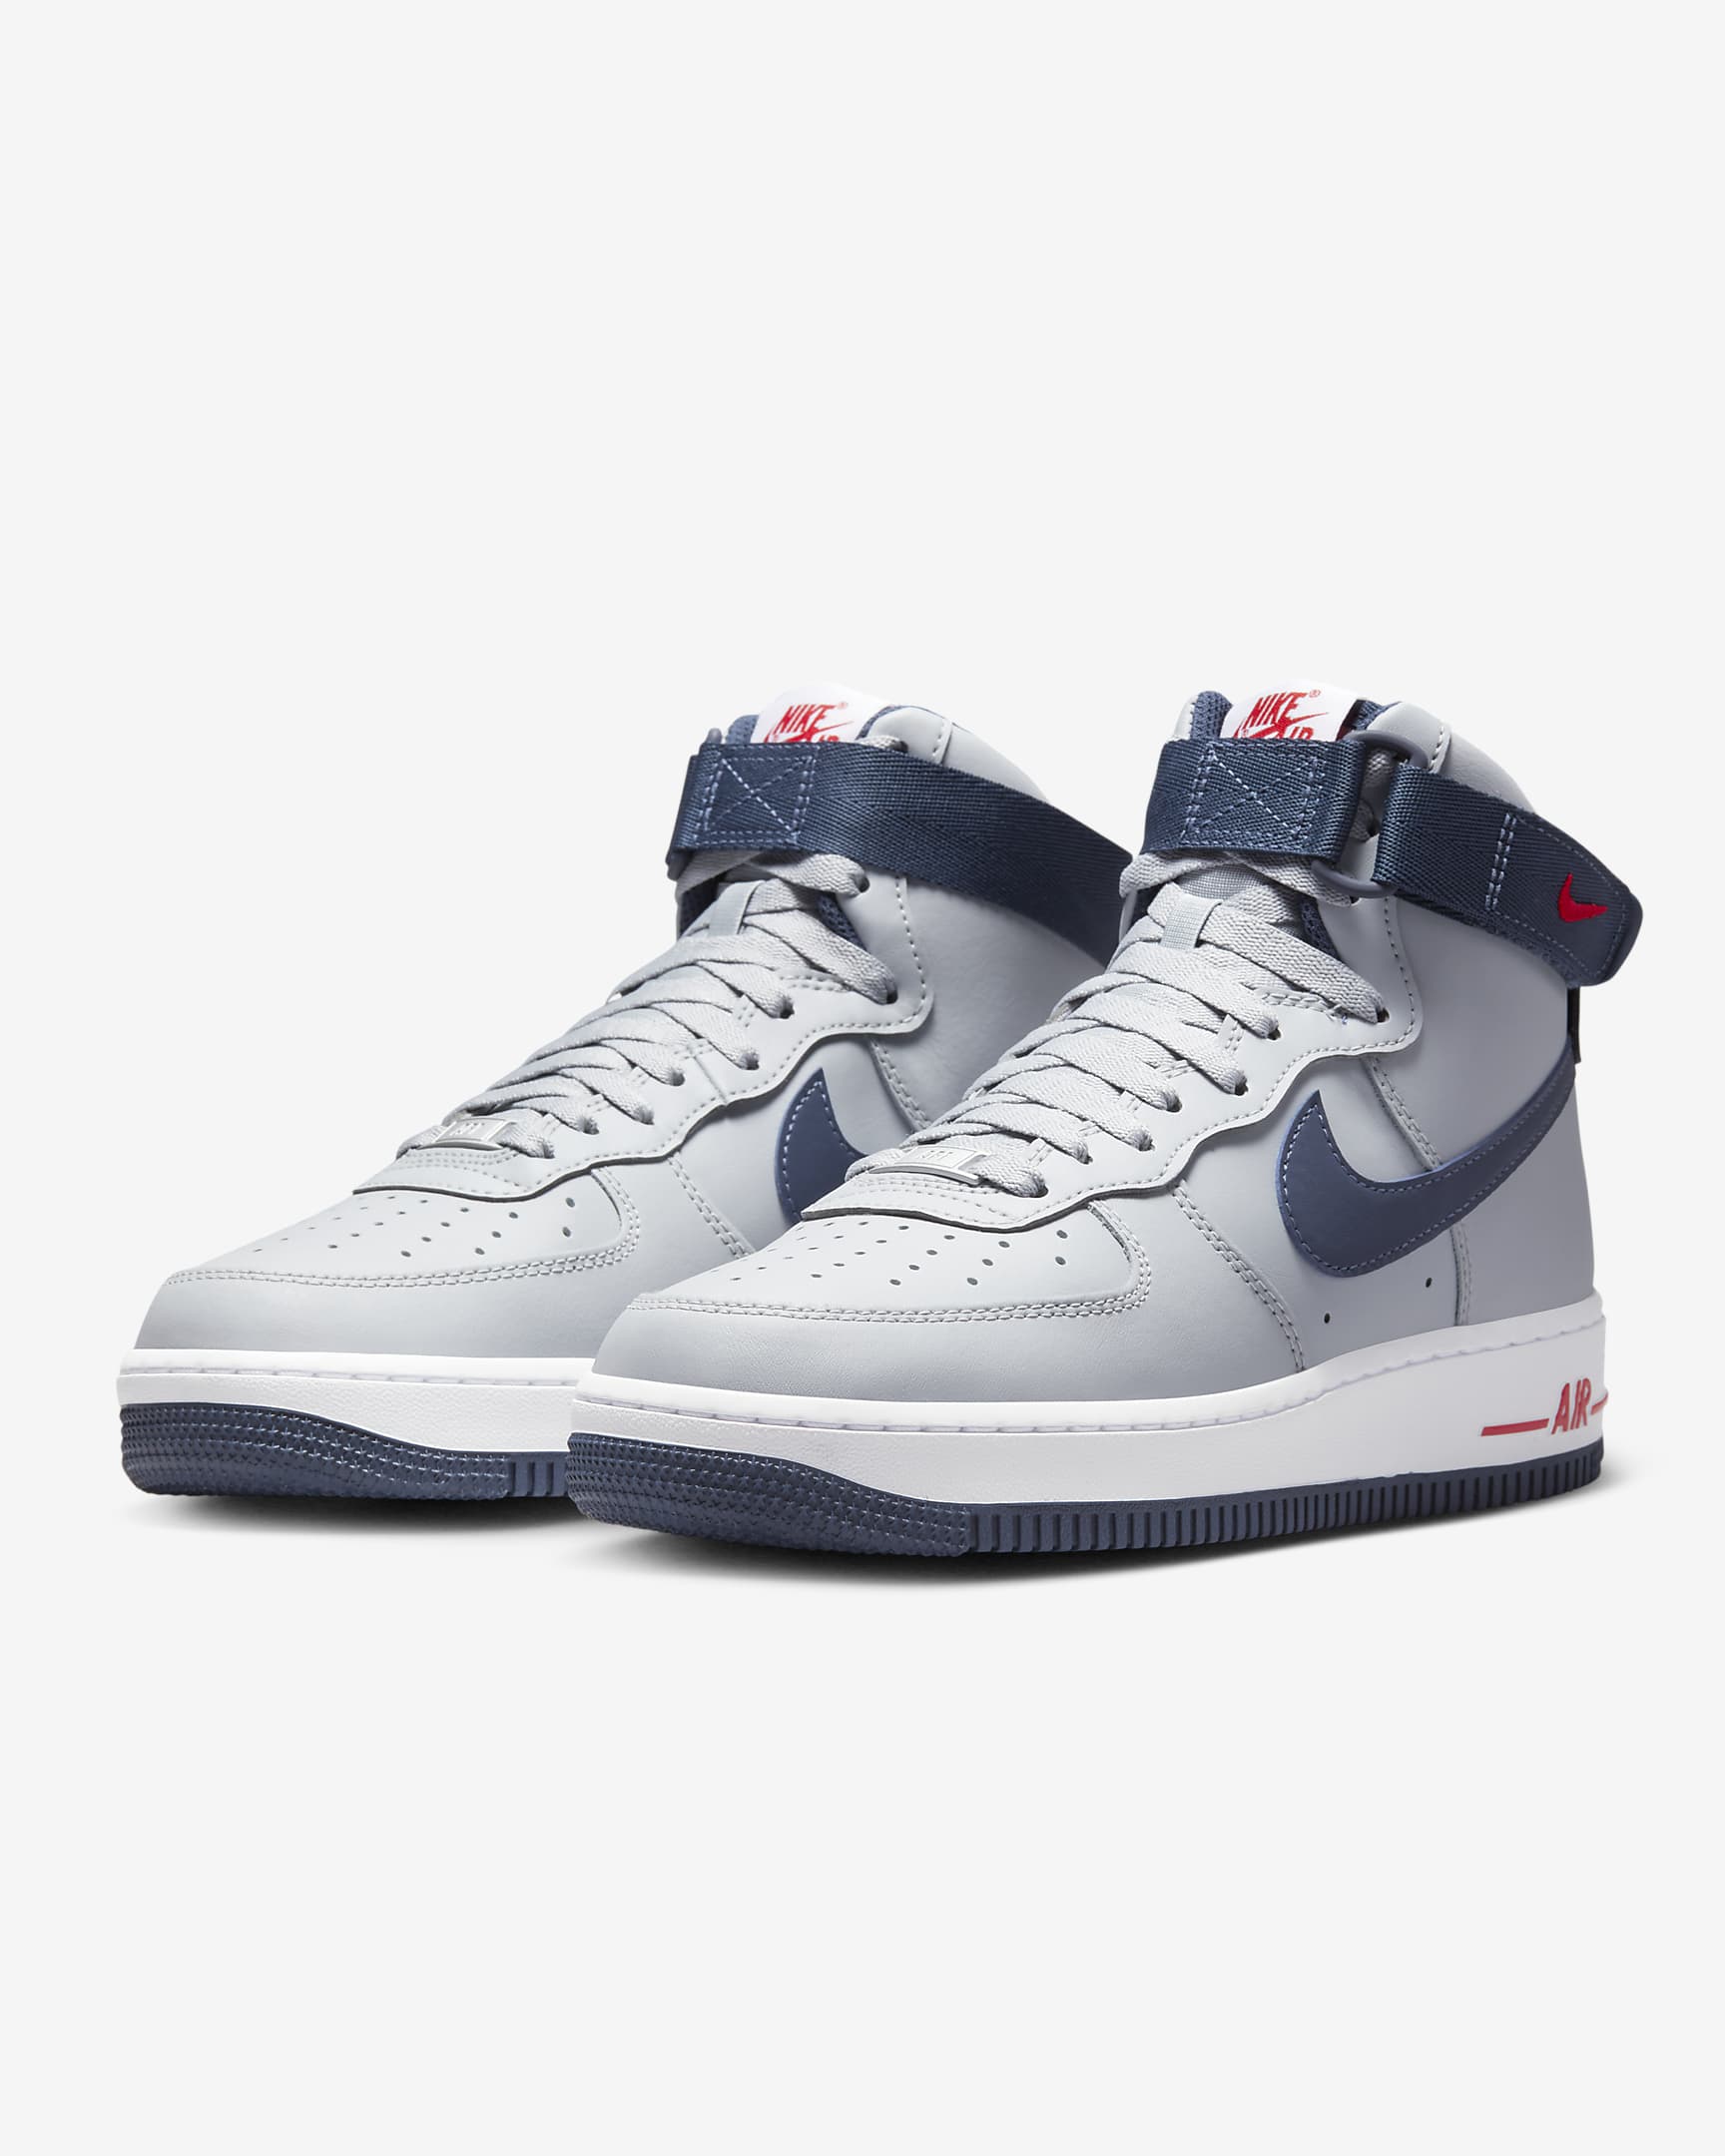 Nike Women's Air Force 1 High Shoes (Wolf Grey/University Red/White/College Navy)